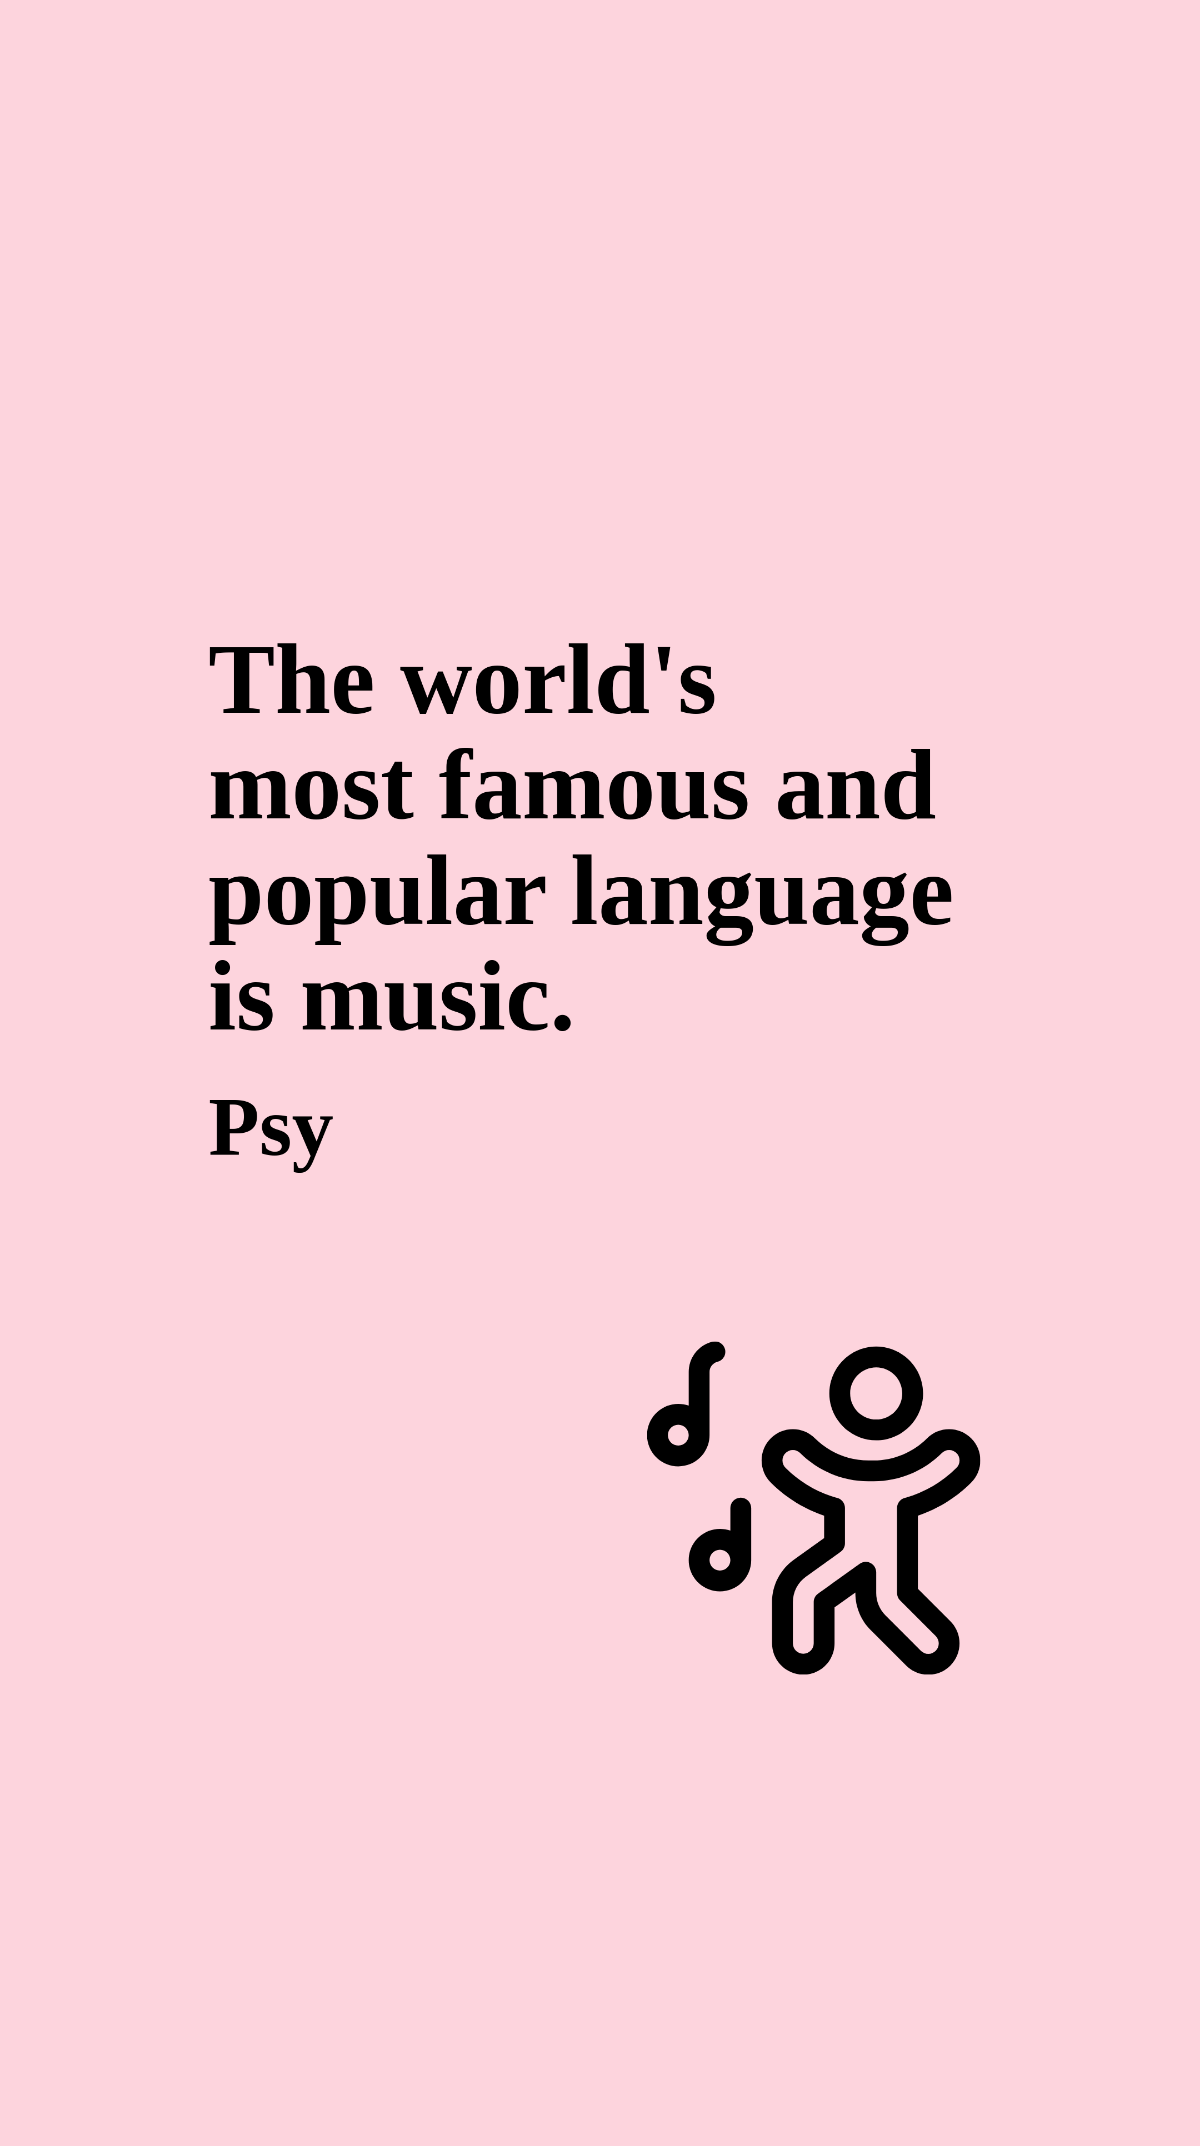 Psy - The world's most famous and popular language is music.